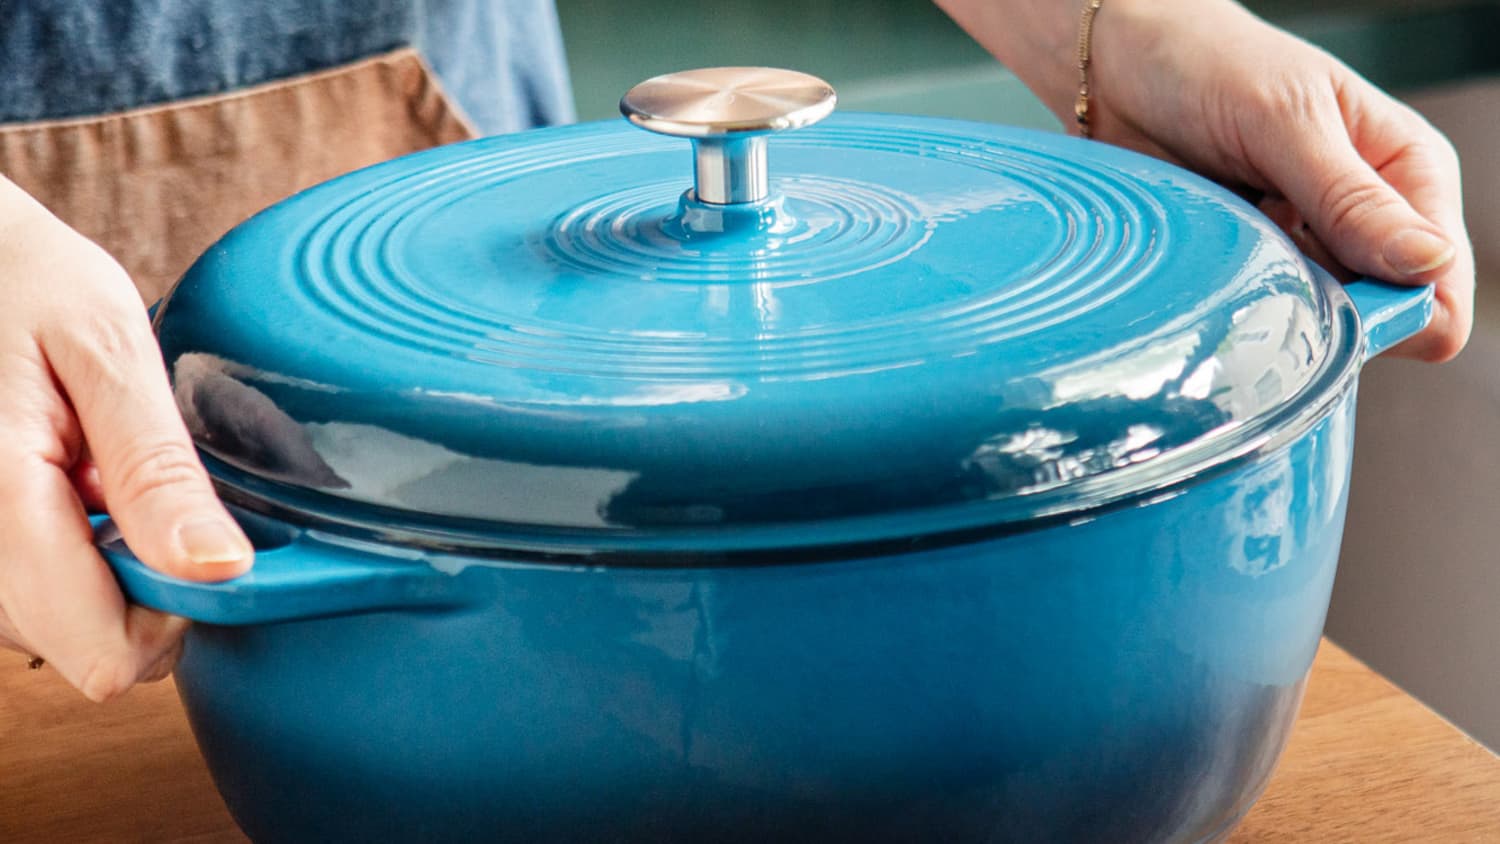 Le Creuset vs Staub: which cult classic cast iron cookware is best